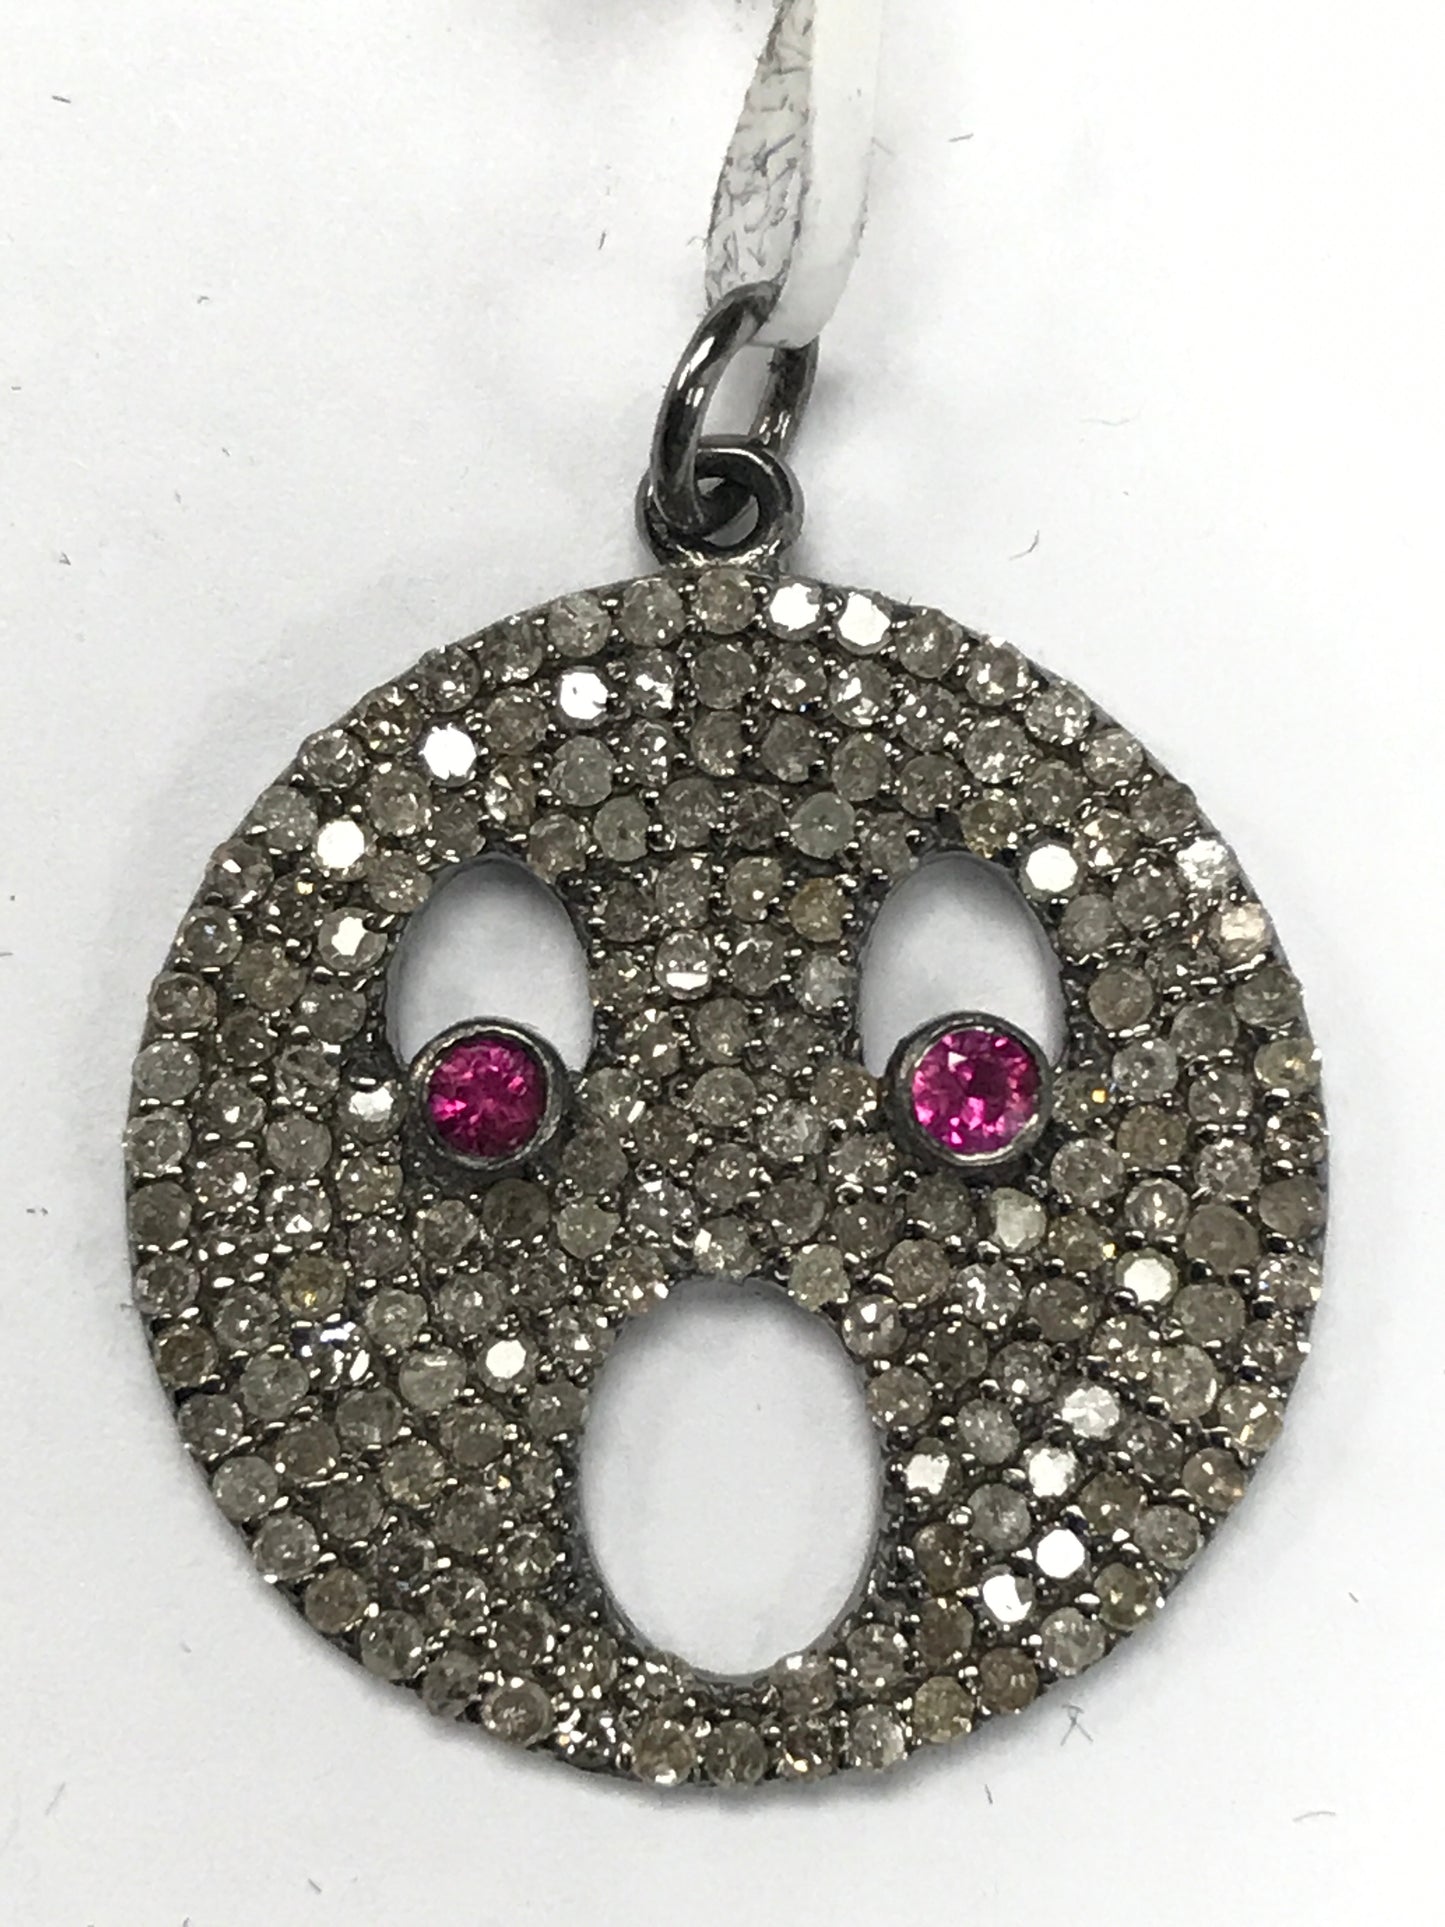 Funny Face (Wow Face) Diamond Pendants and Charms